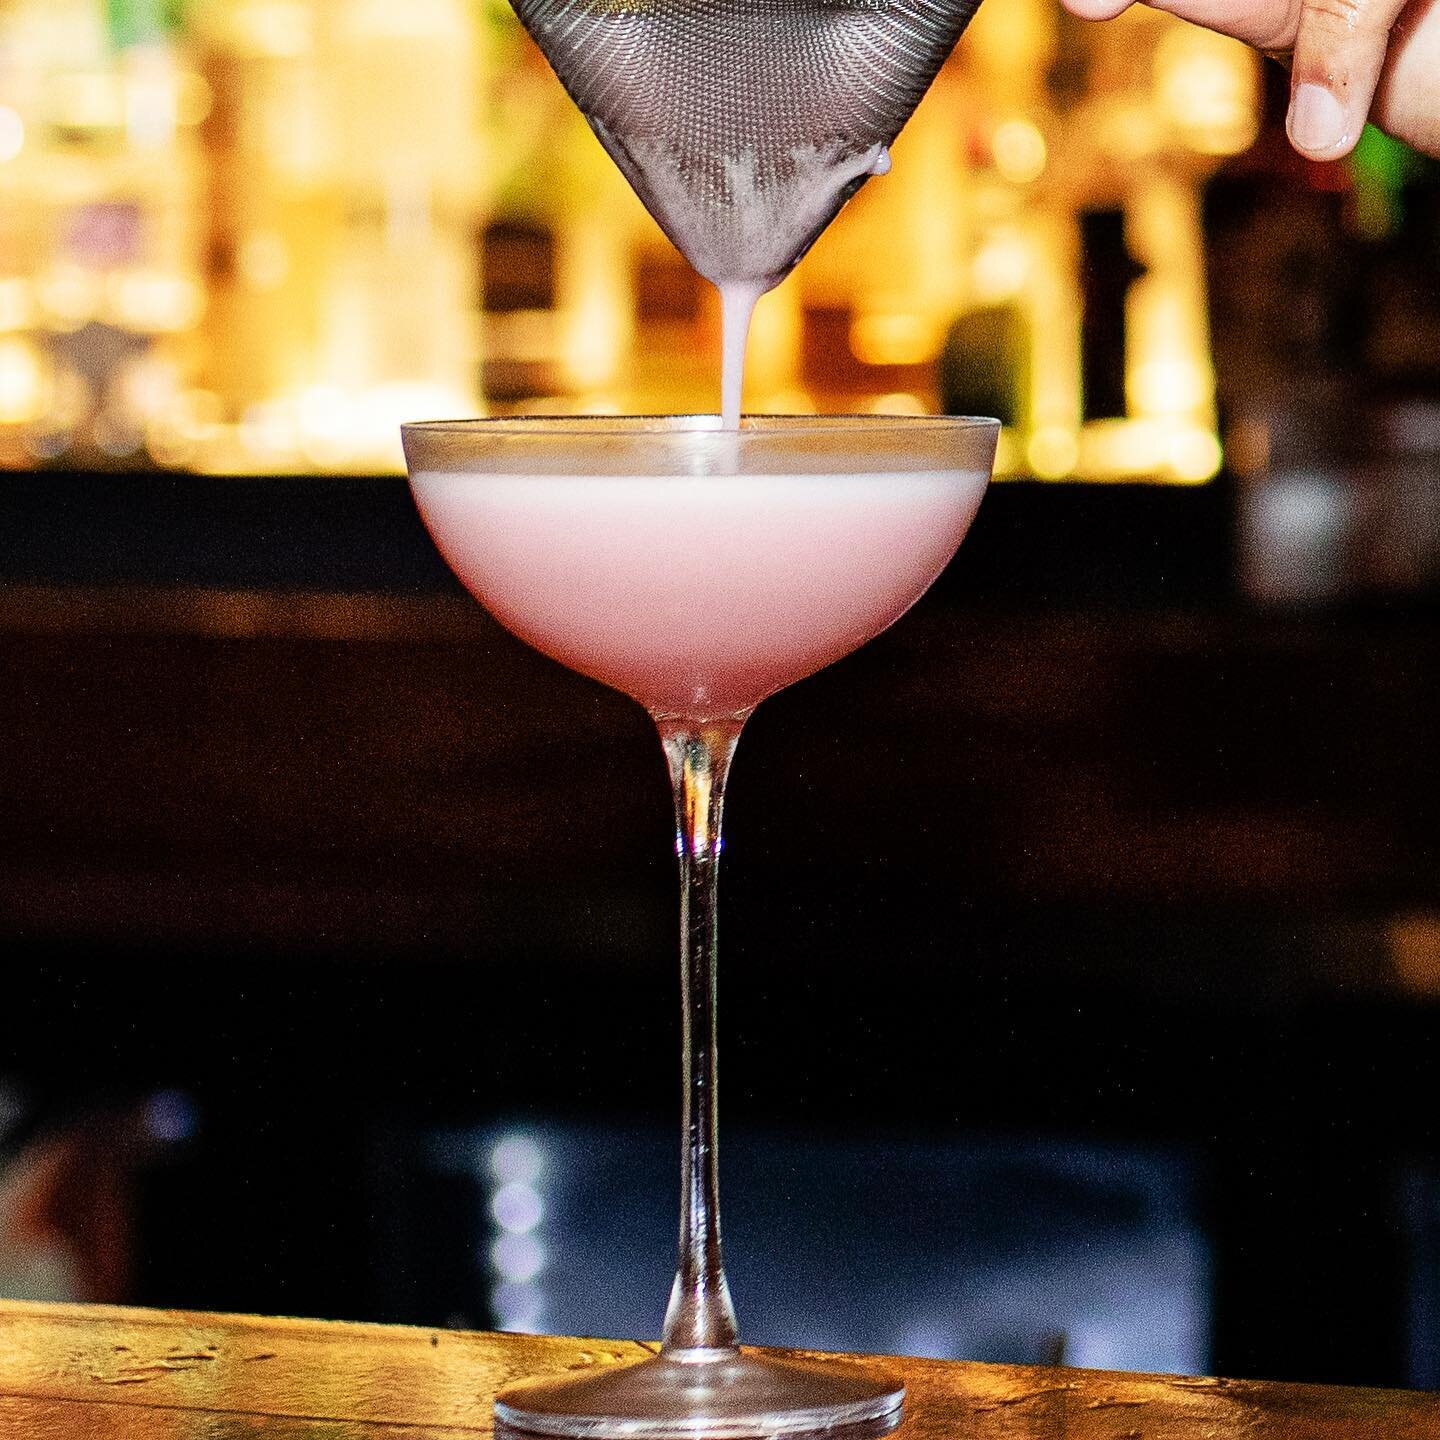 Crafted cocktails with a touch of Japans finest flavours. Our cocktail menu is not one to miss 
Open Mon-Sat, 5:30-Late
Book now, link in bio.

#byronbay #byron #byronbayfood #cocktails #lycheemartini #cocktail #byronfood